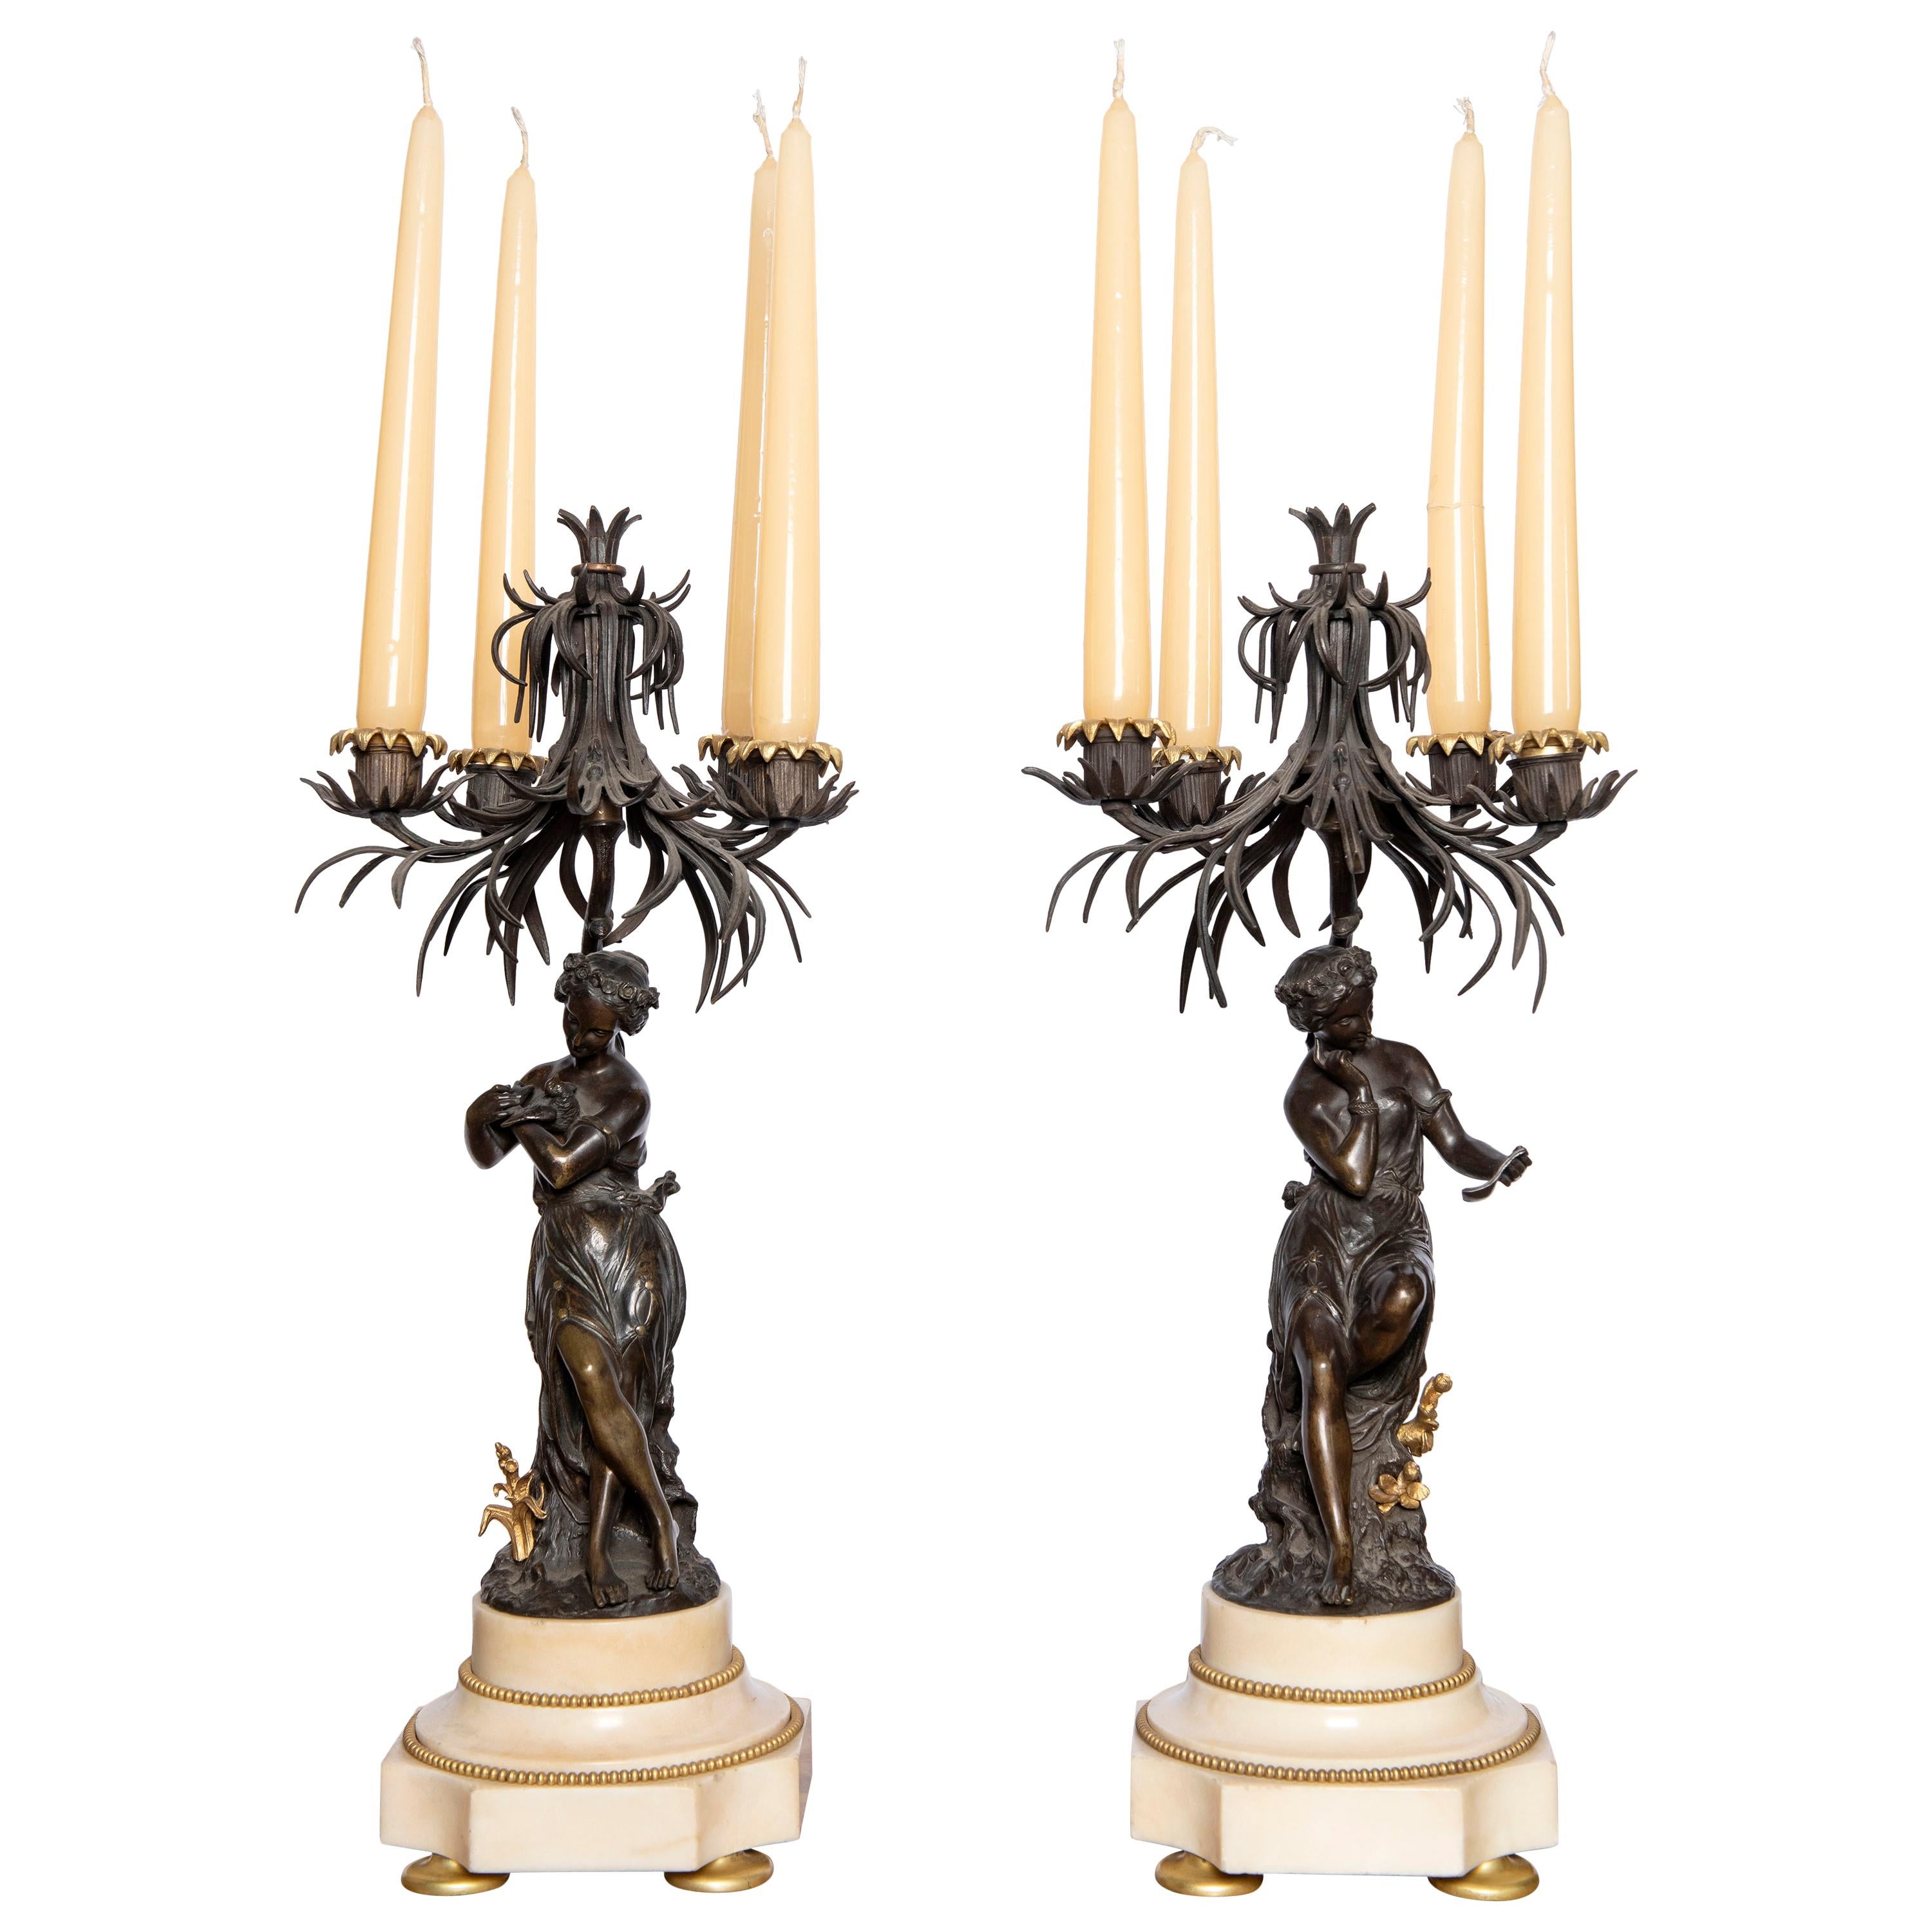 Pair of Bronze and Marble Candelabras, France, 19th Century